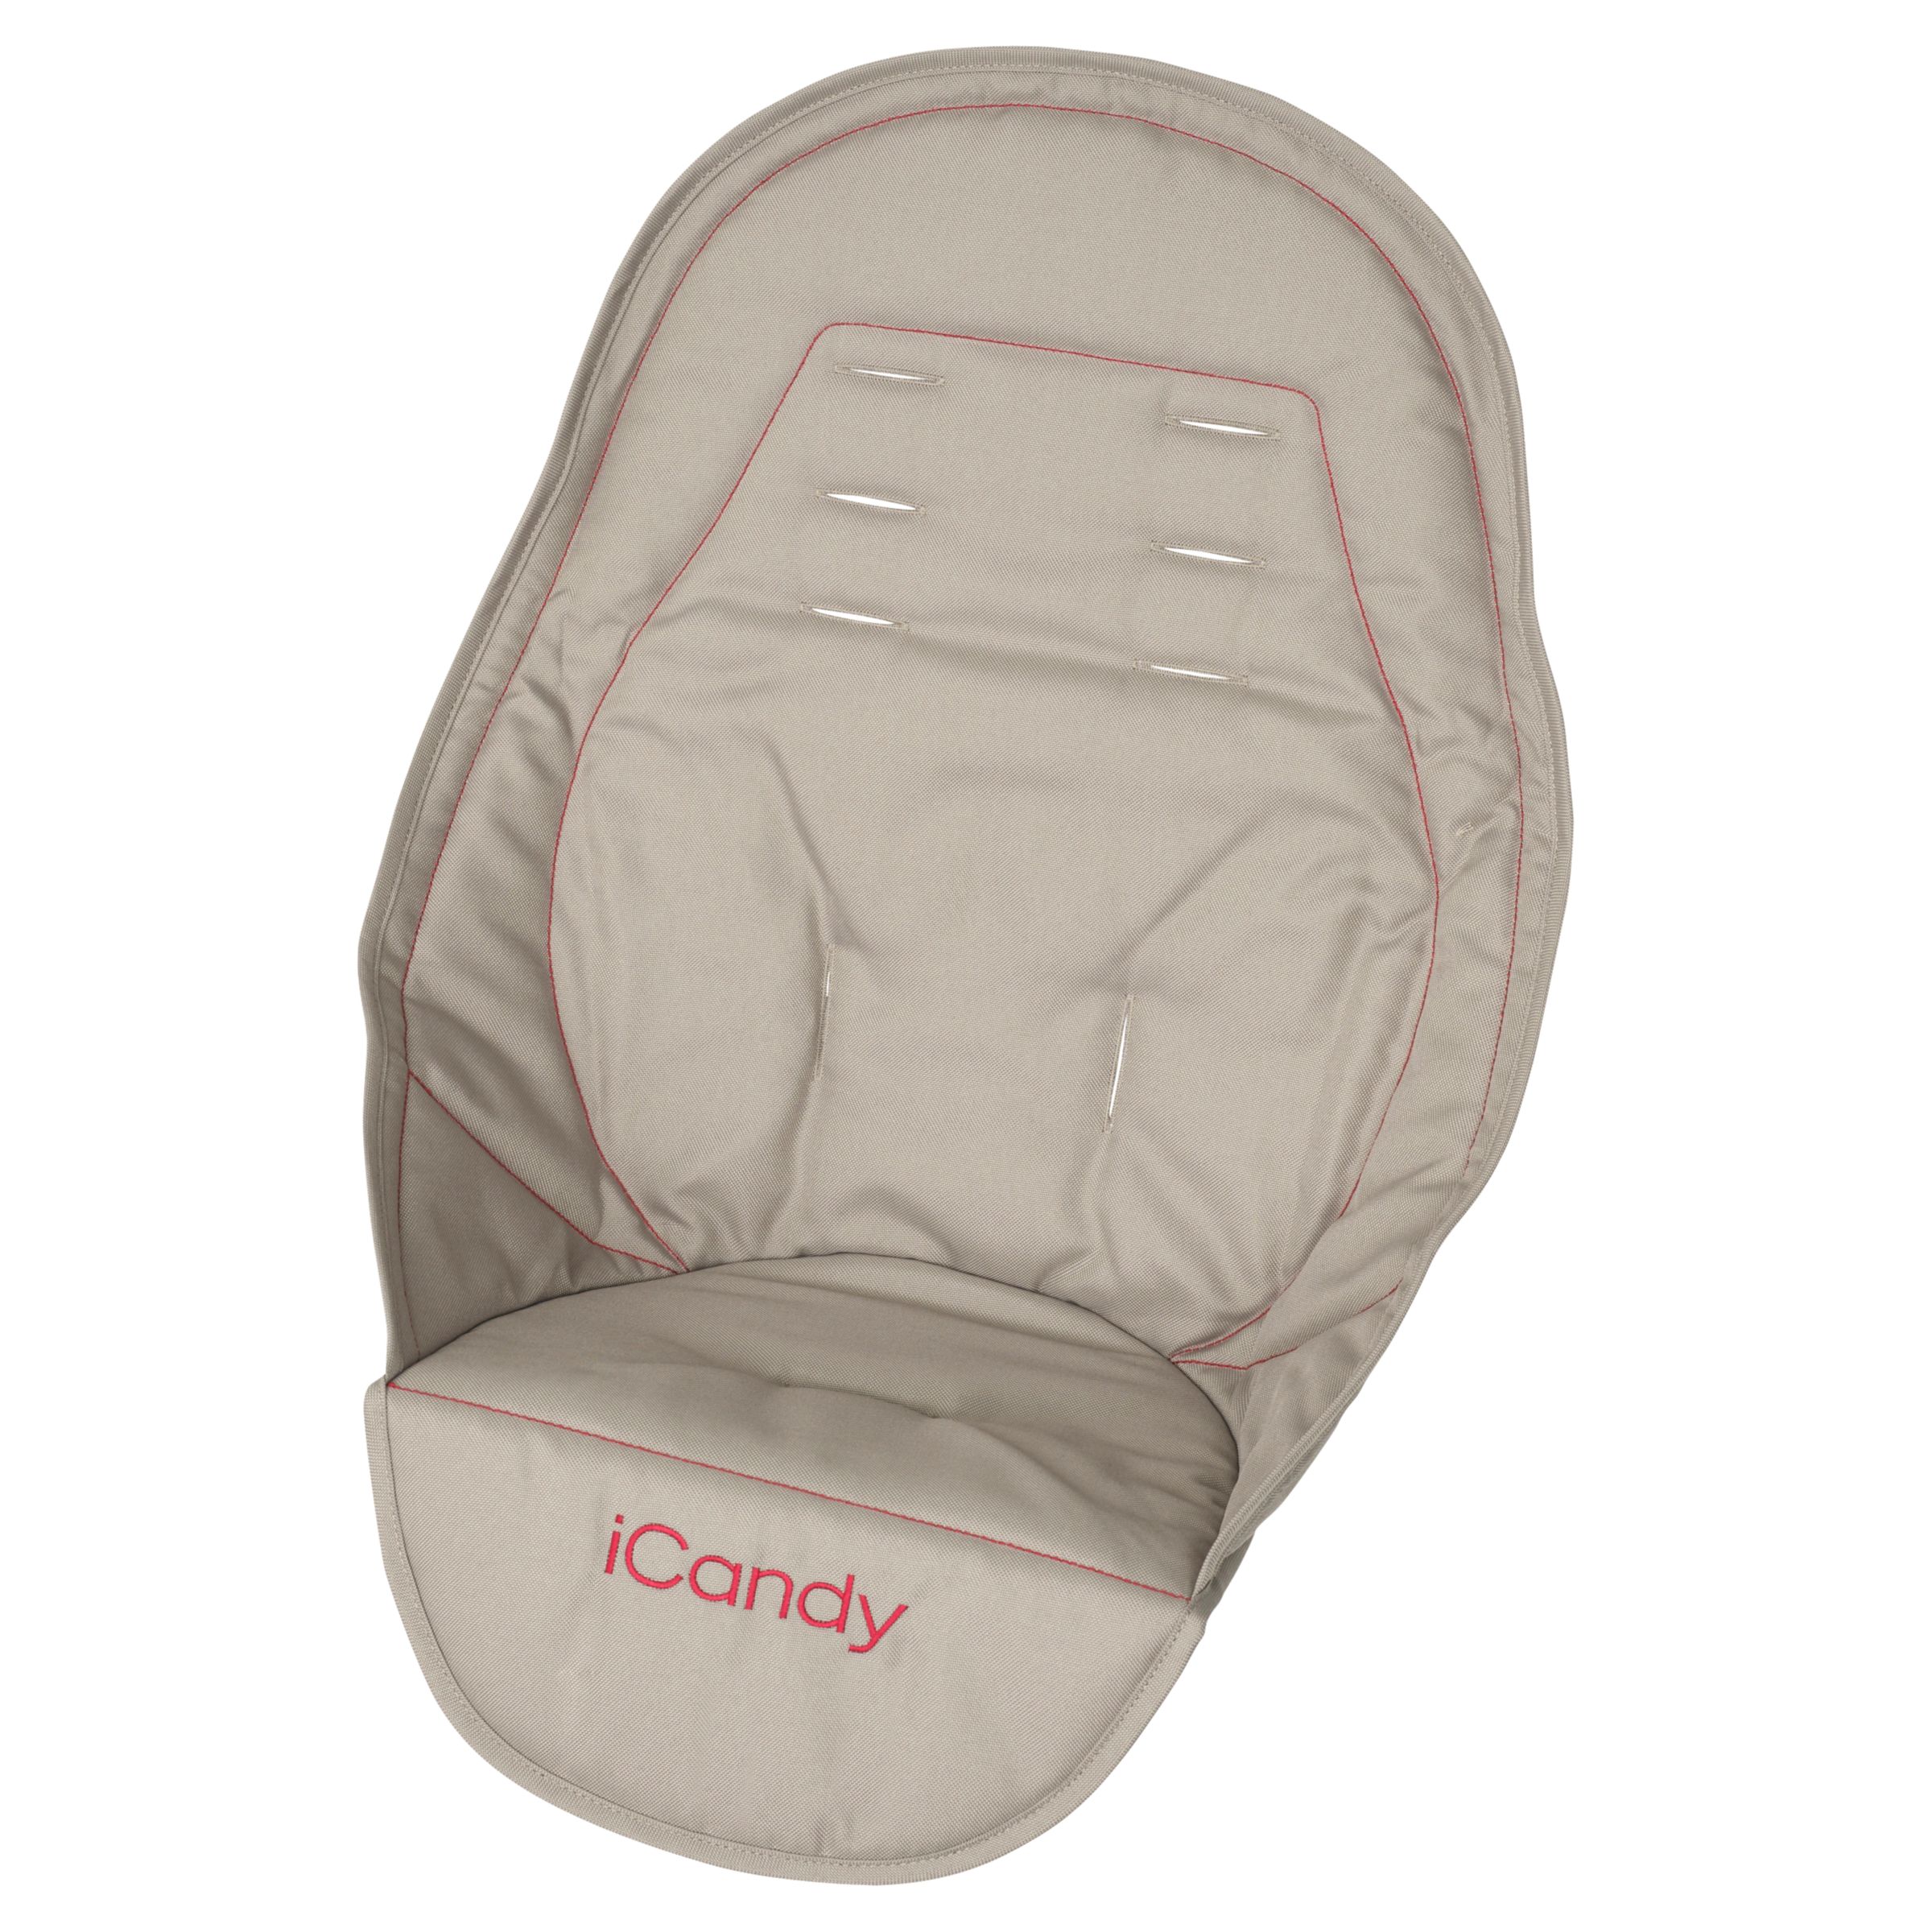 icandy peach 3 seat liner